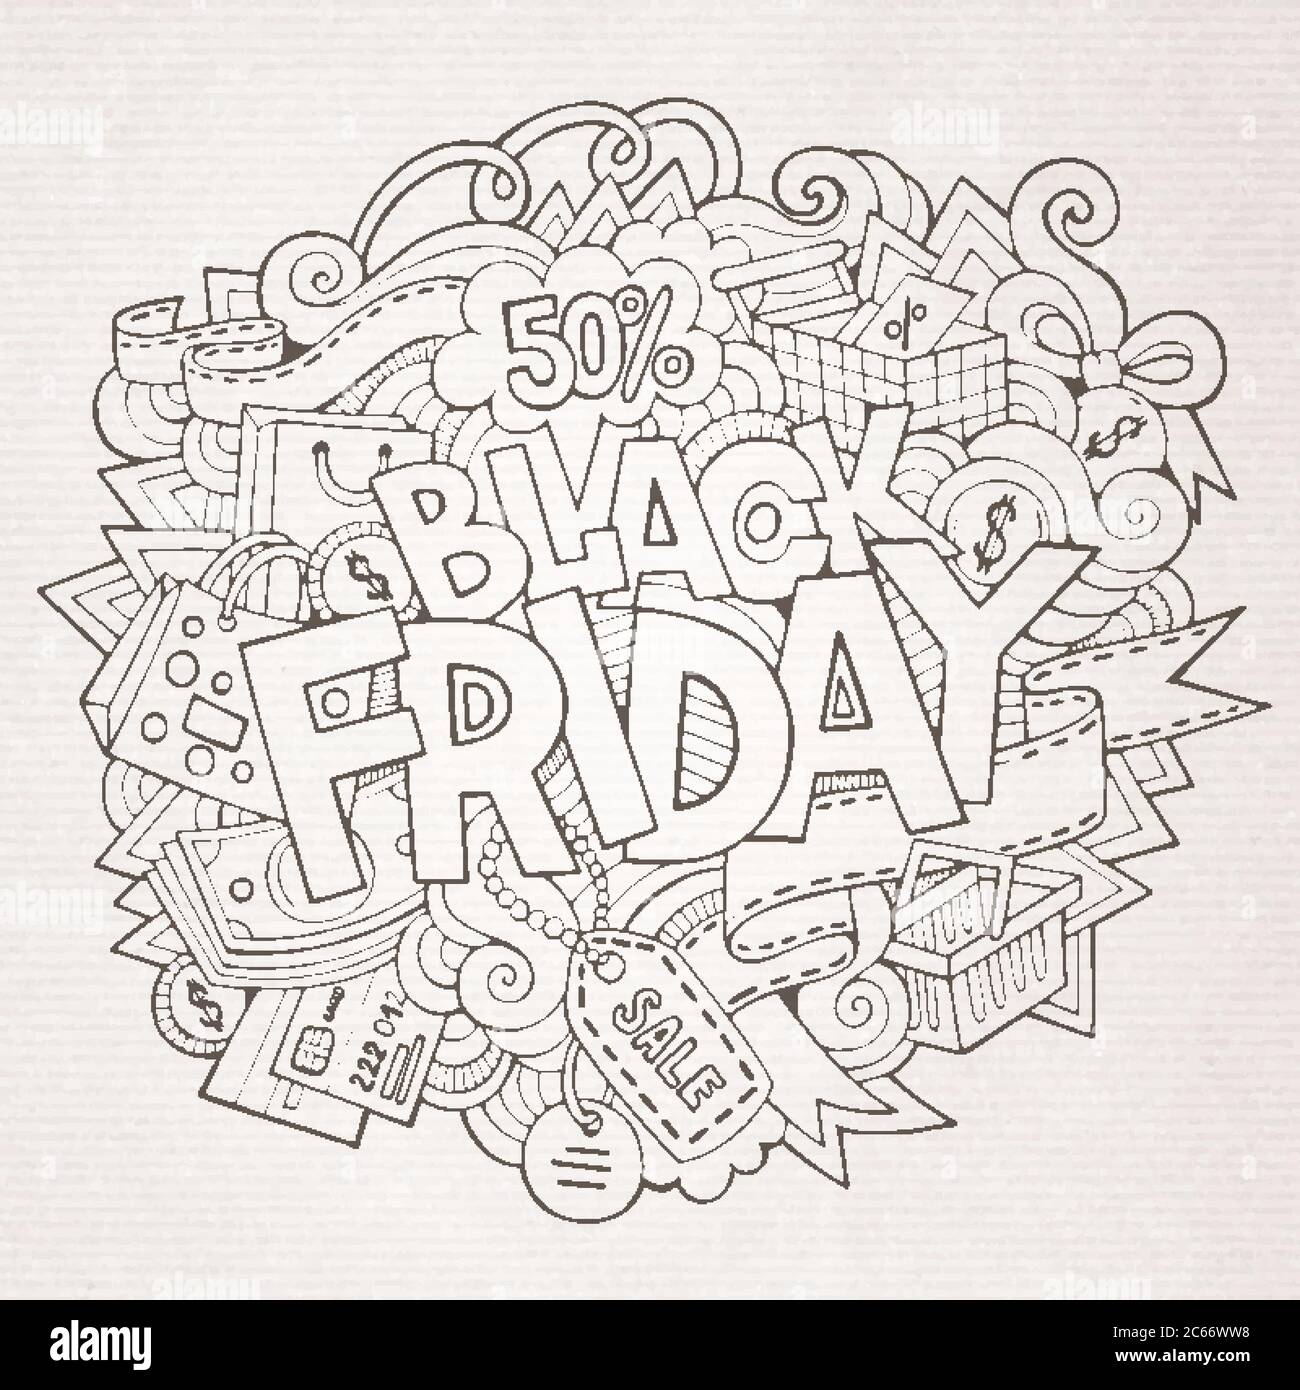 Black Friday sale hand lettering and doodles elements Stock Vector